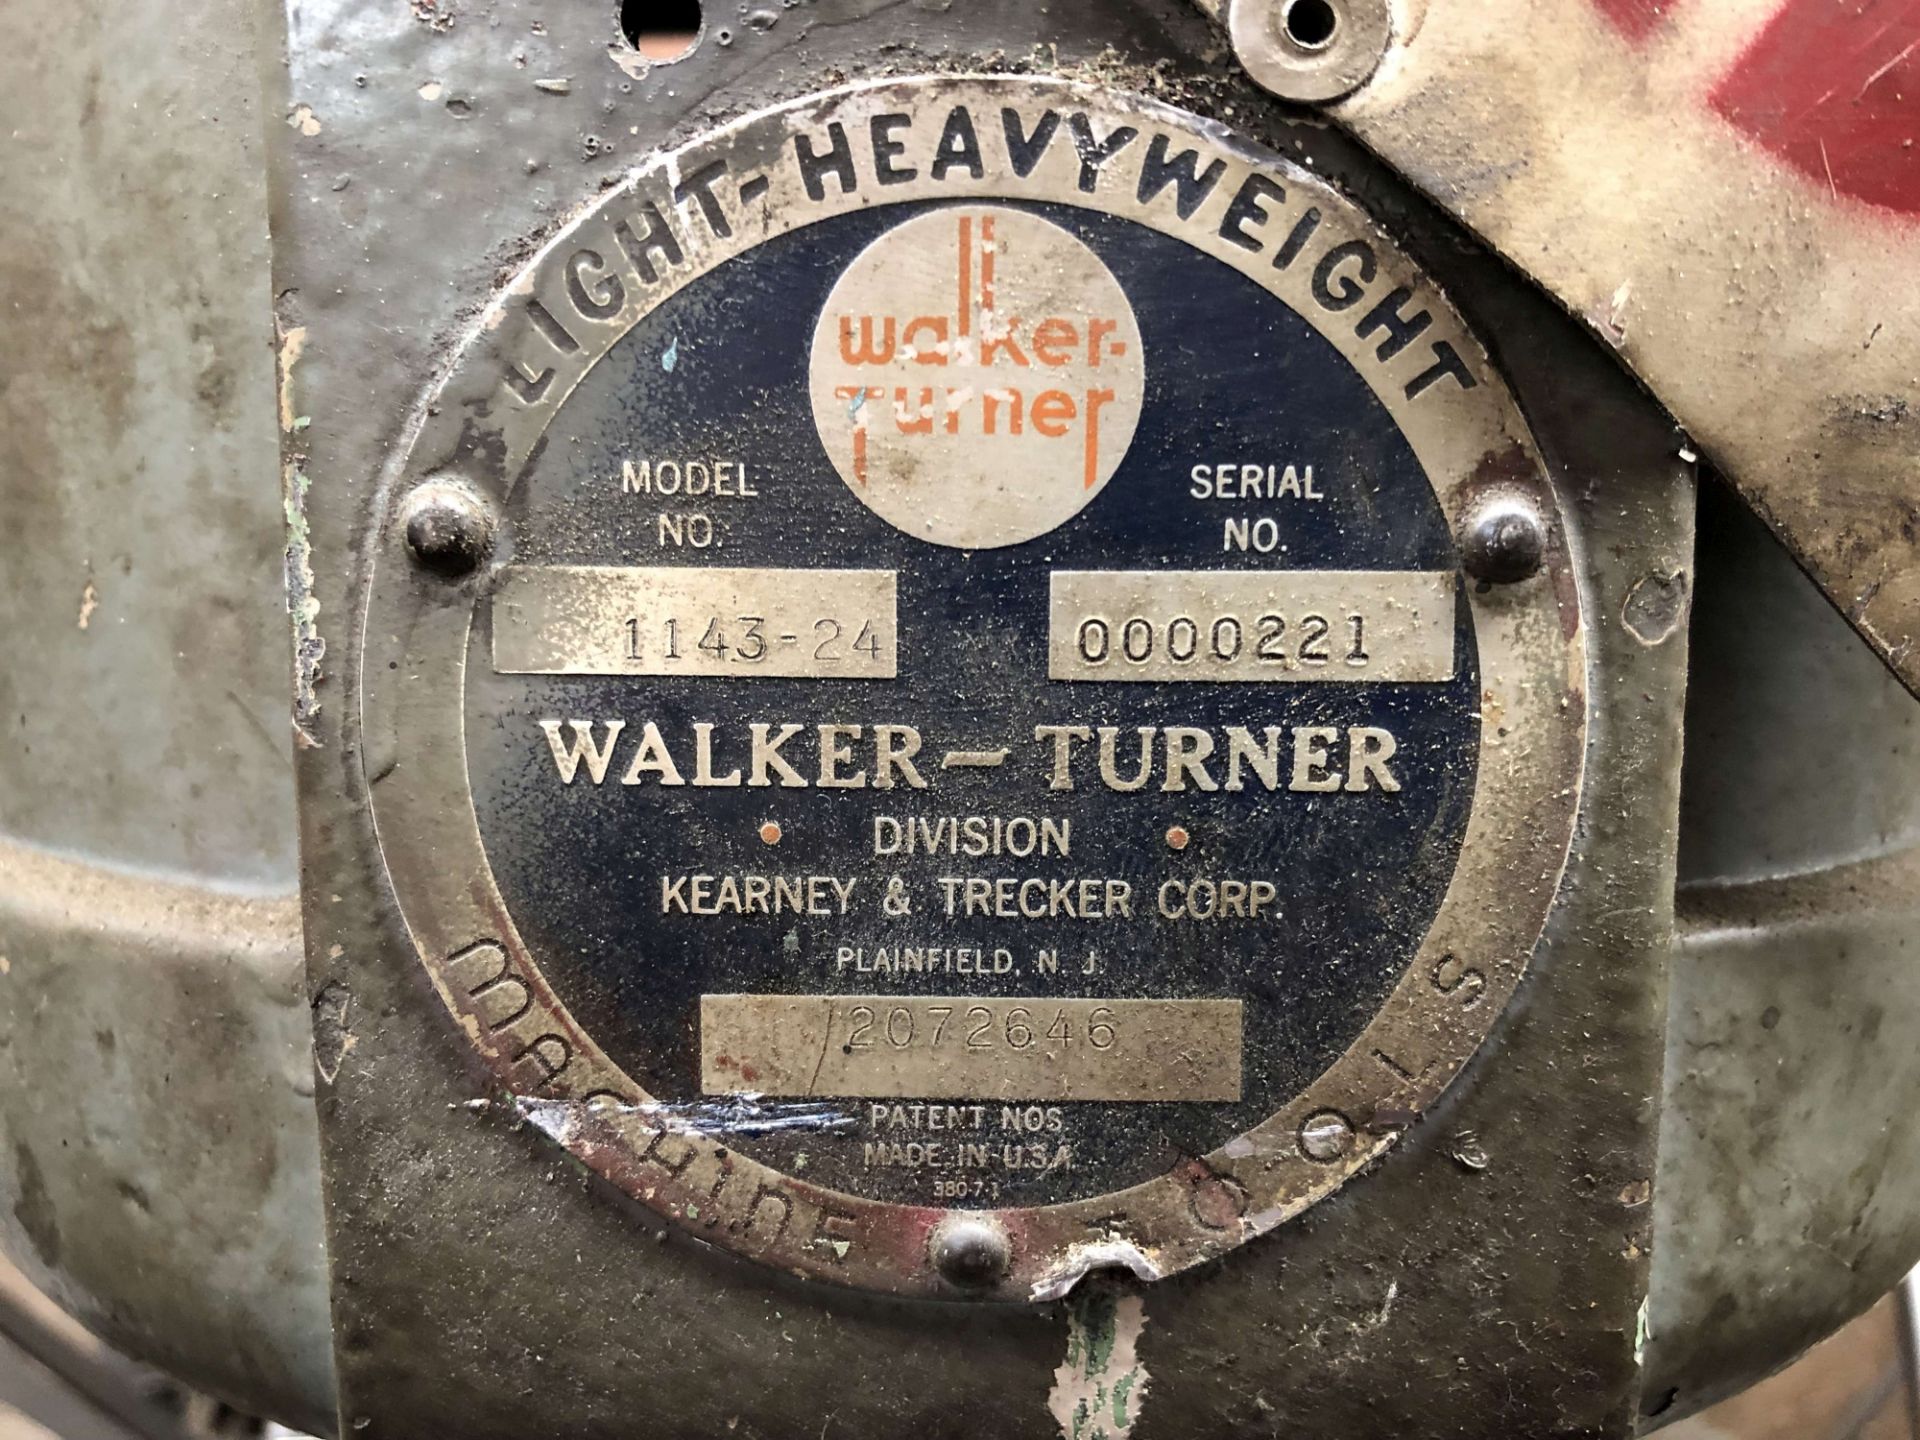 Walker-Turner 18" Drill Press, Table: 35-1/2" L to R, 24-1/2" F to B, Model 1143-24, S/N 0000221 - Image 3 of 3